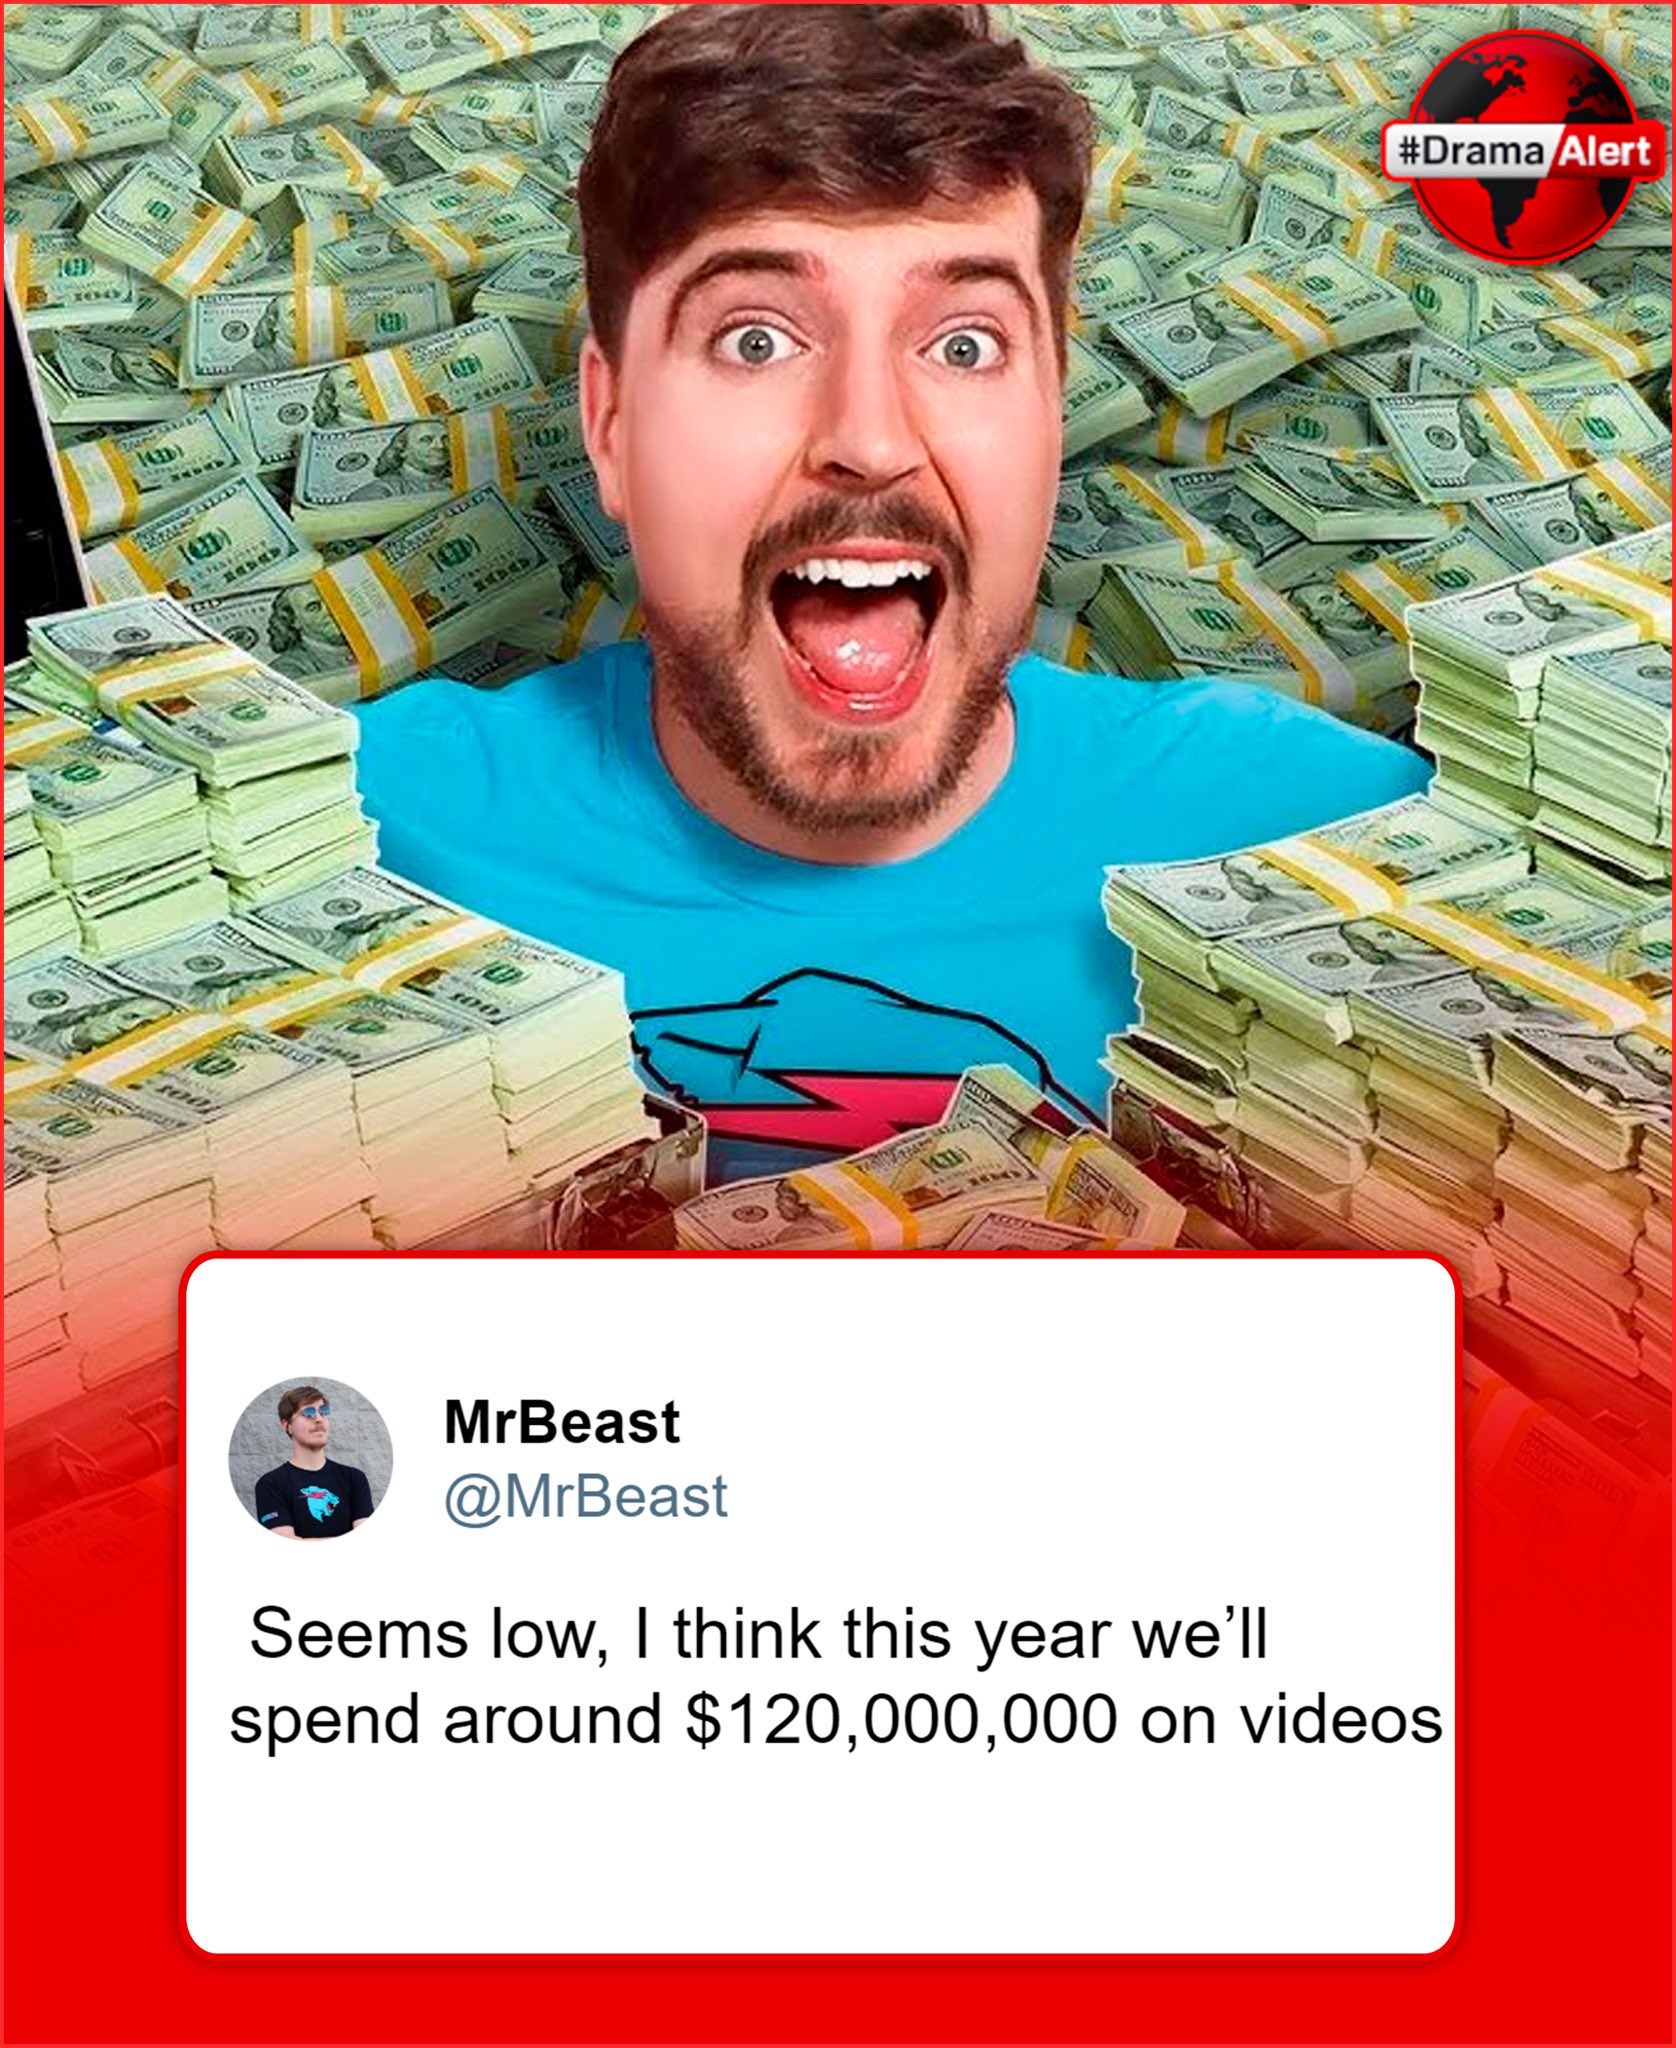 Step Inside MrBeast’s Challenge: Will a Grocery Store Stay Cost Him a Fortune?